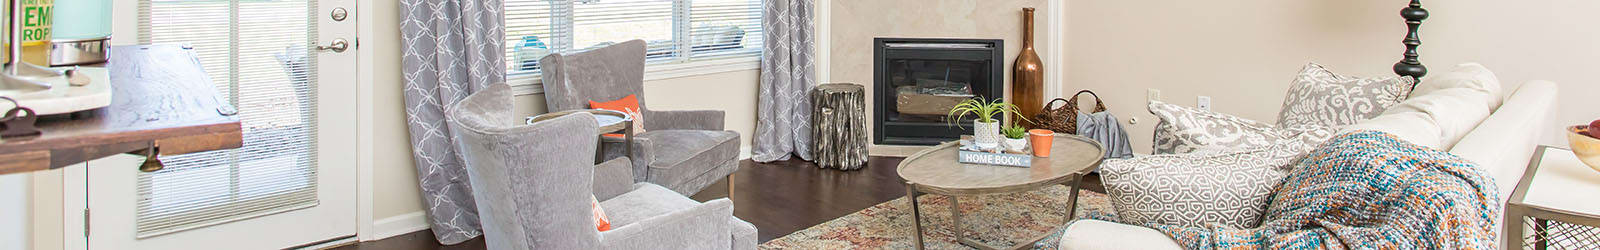 Contact Orchard View Senior Apartments for information about our apartments in Rochester